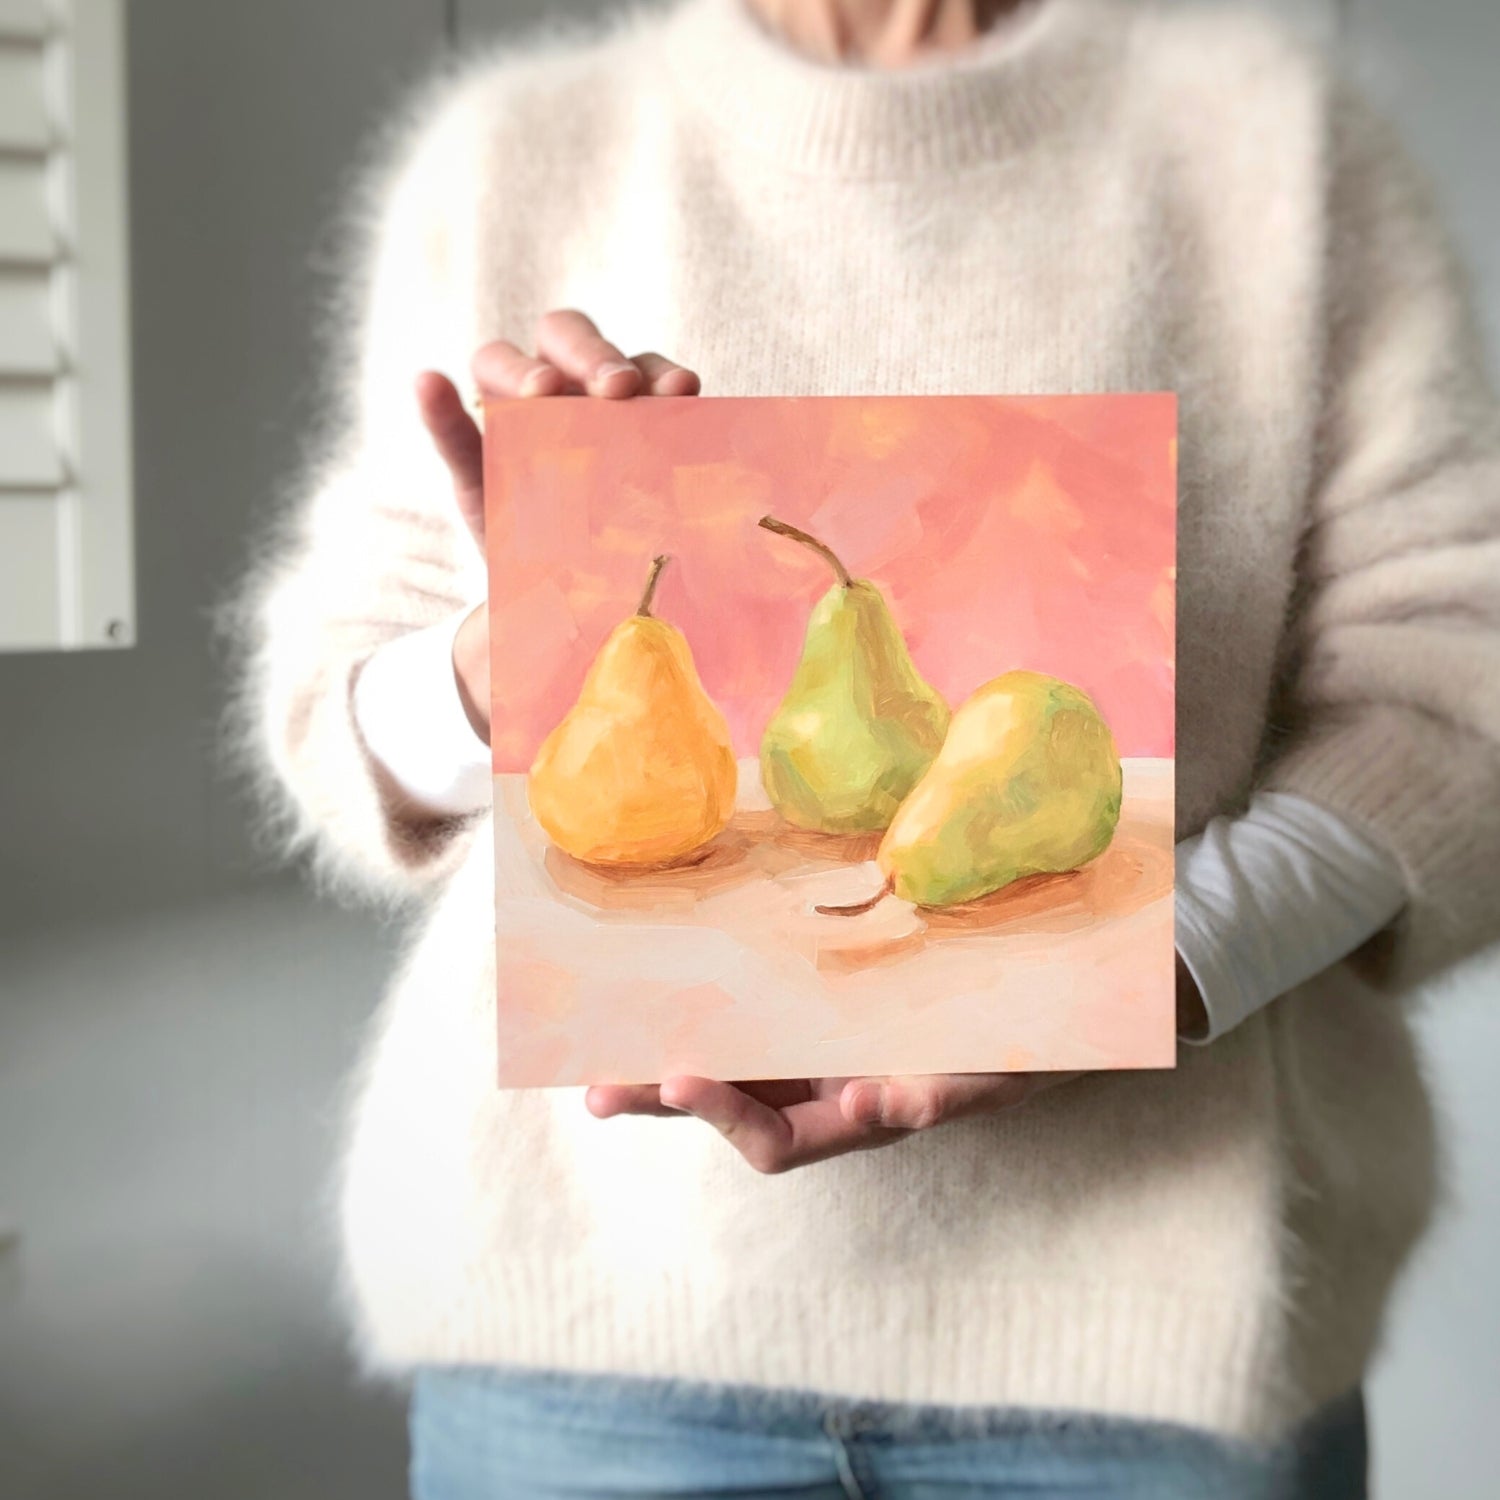 photo of a person holding an original oil painting of three yellow and green pears on a soft cream surface and a soft pink background painted in an impressionistic way